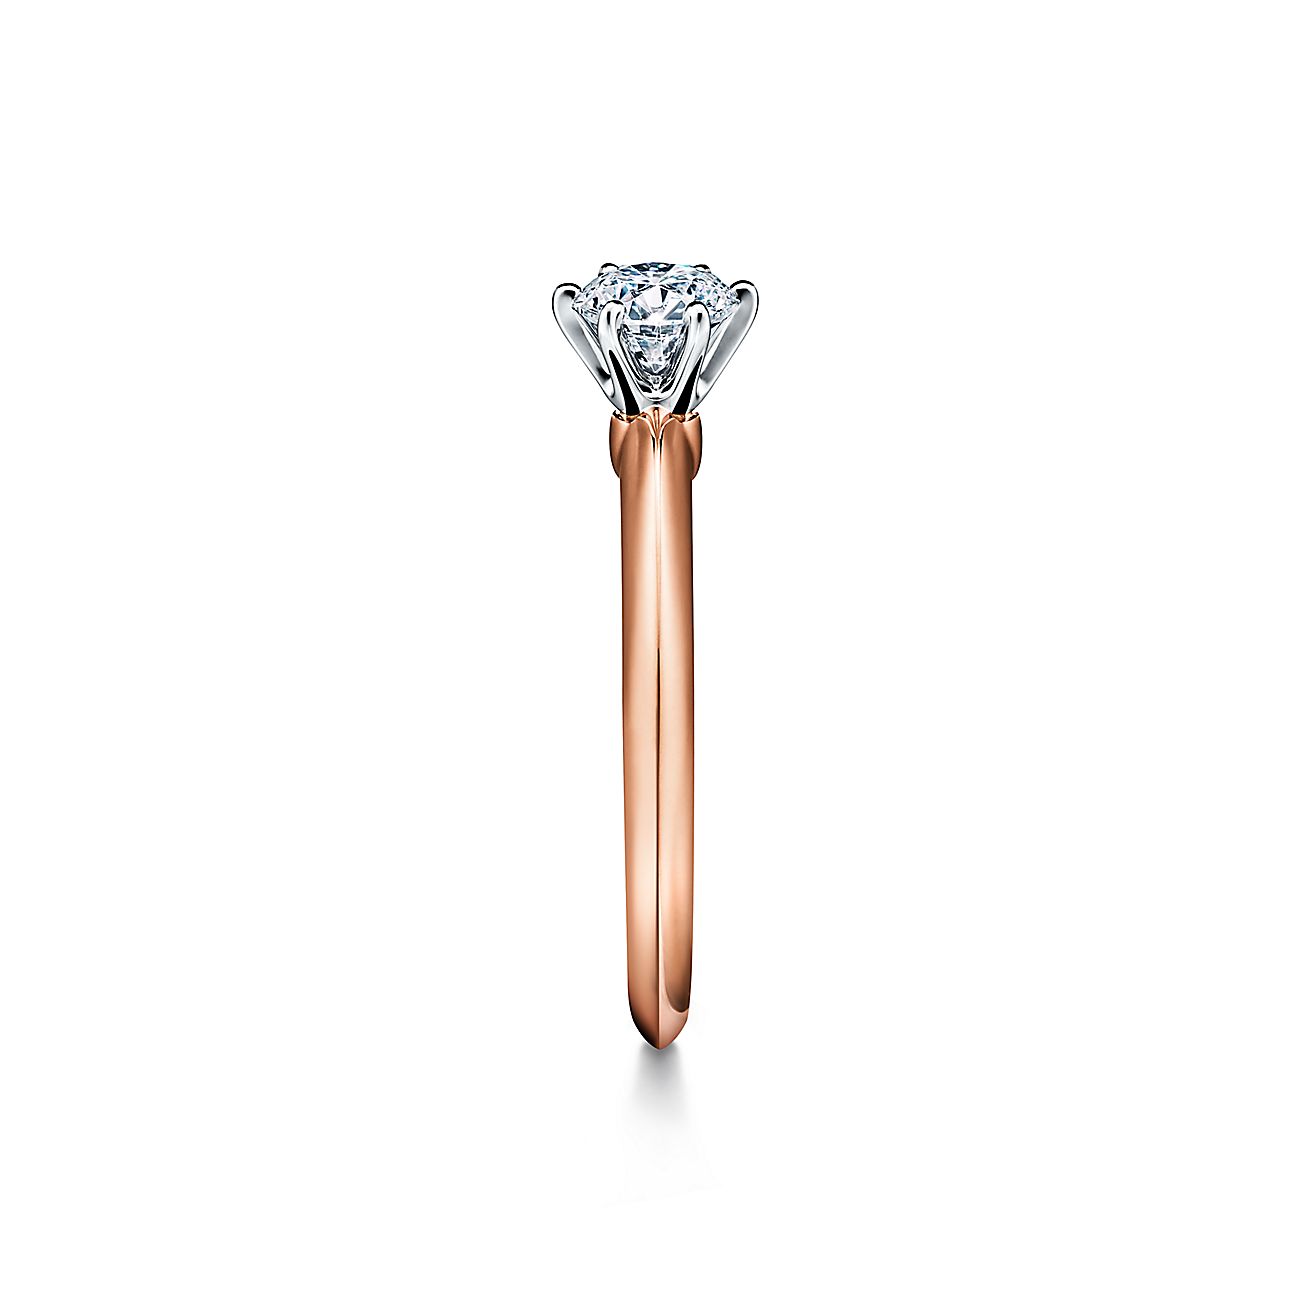 The Tiffany® Setting Engagement Ring in 18k Rose Gold